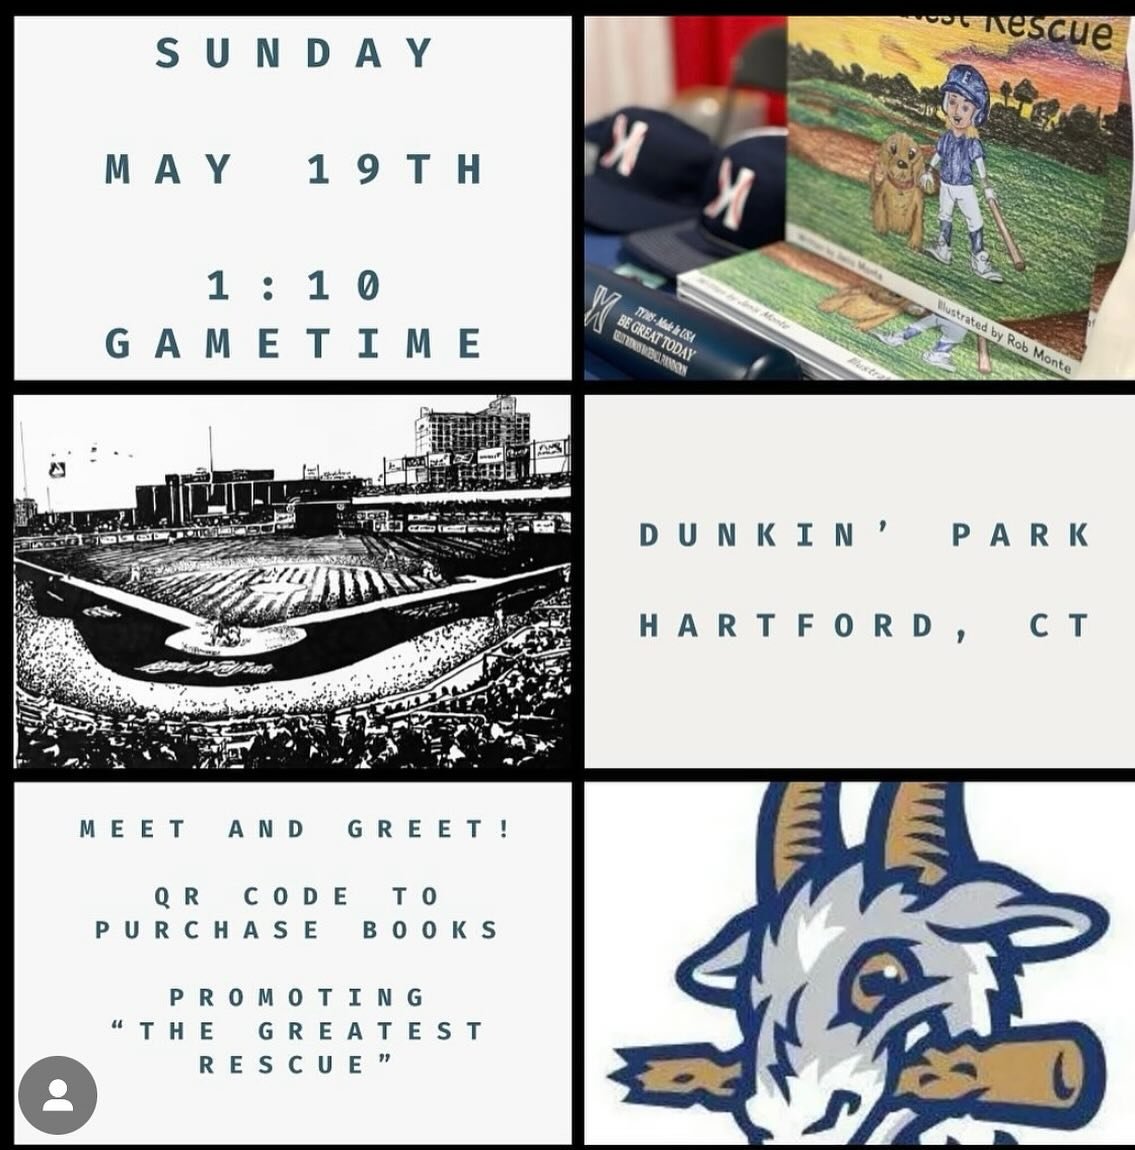 The 2024 MiLB Greatest Rescue Book Tour begins this Sunday May 19 at Dunkin&rsquo; Park. Come Be Great Today and meet the author, illustrator and Charlie for onsite auto and pawtographs🐶🐾. You can pre purchase your book at the link in bio and bring